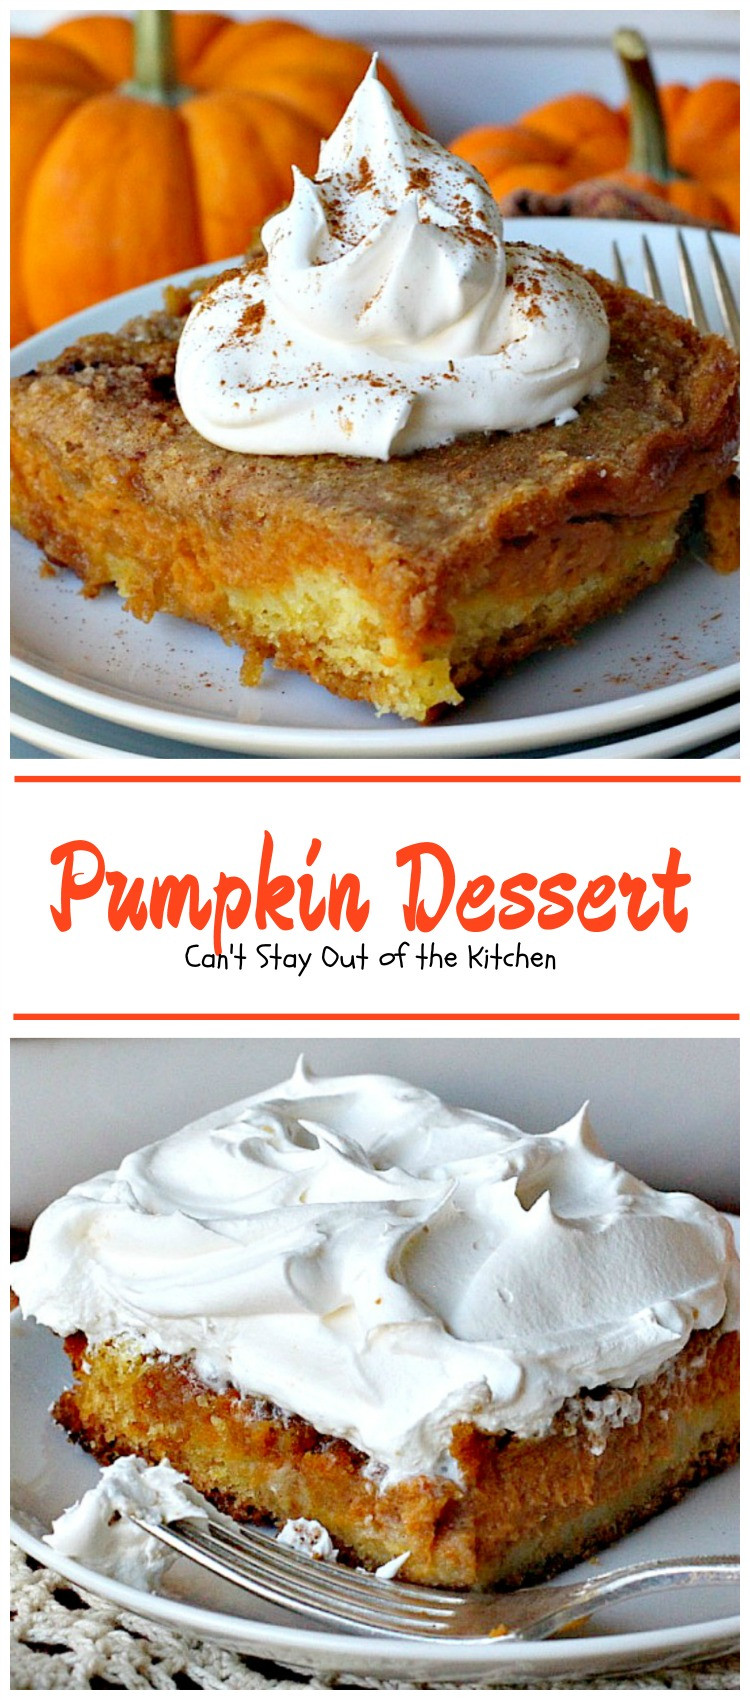 Canned Pumpkin Desserts Recipes
 Pumpkin Pie Crust Cinnamon Rolls Can t Stay Out of the